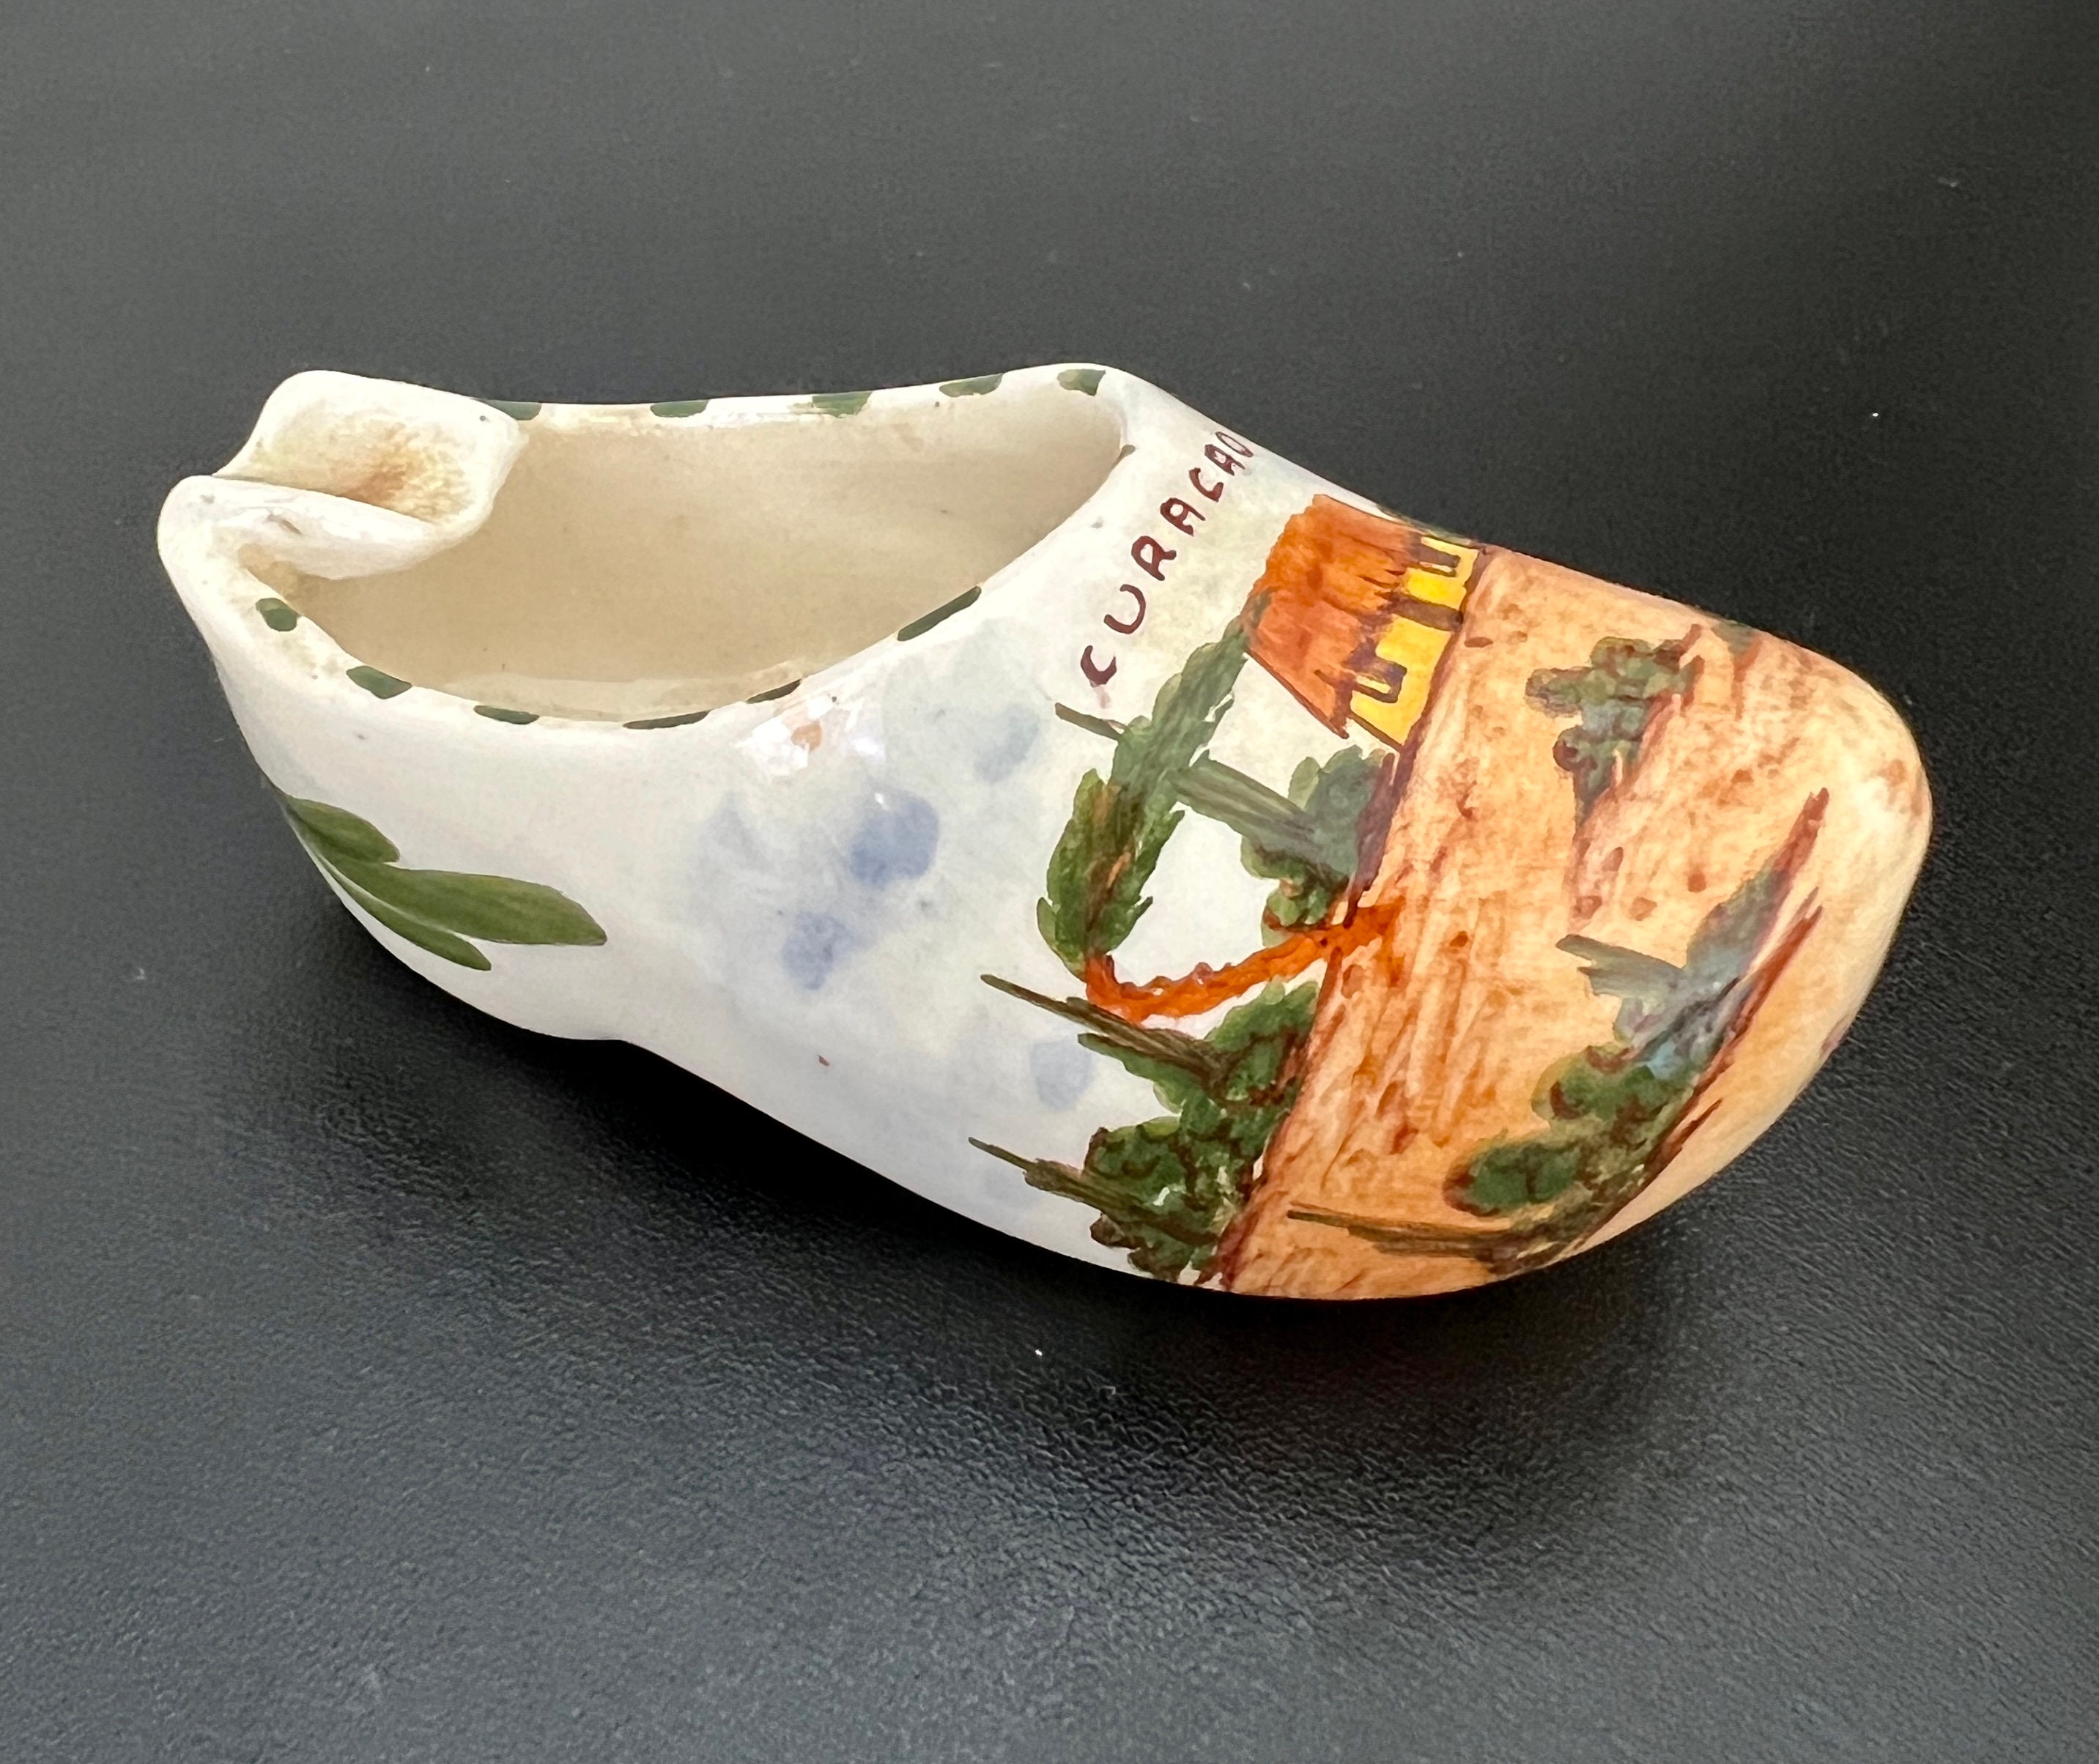 Vintage Rustic Hand Painted Wooden Gnome Shoes Wooden Doll Shoes Wooden  Shoes Doll Supplies Wooden Shoes Fairy Garden 